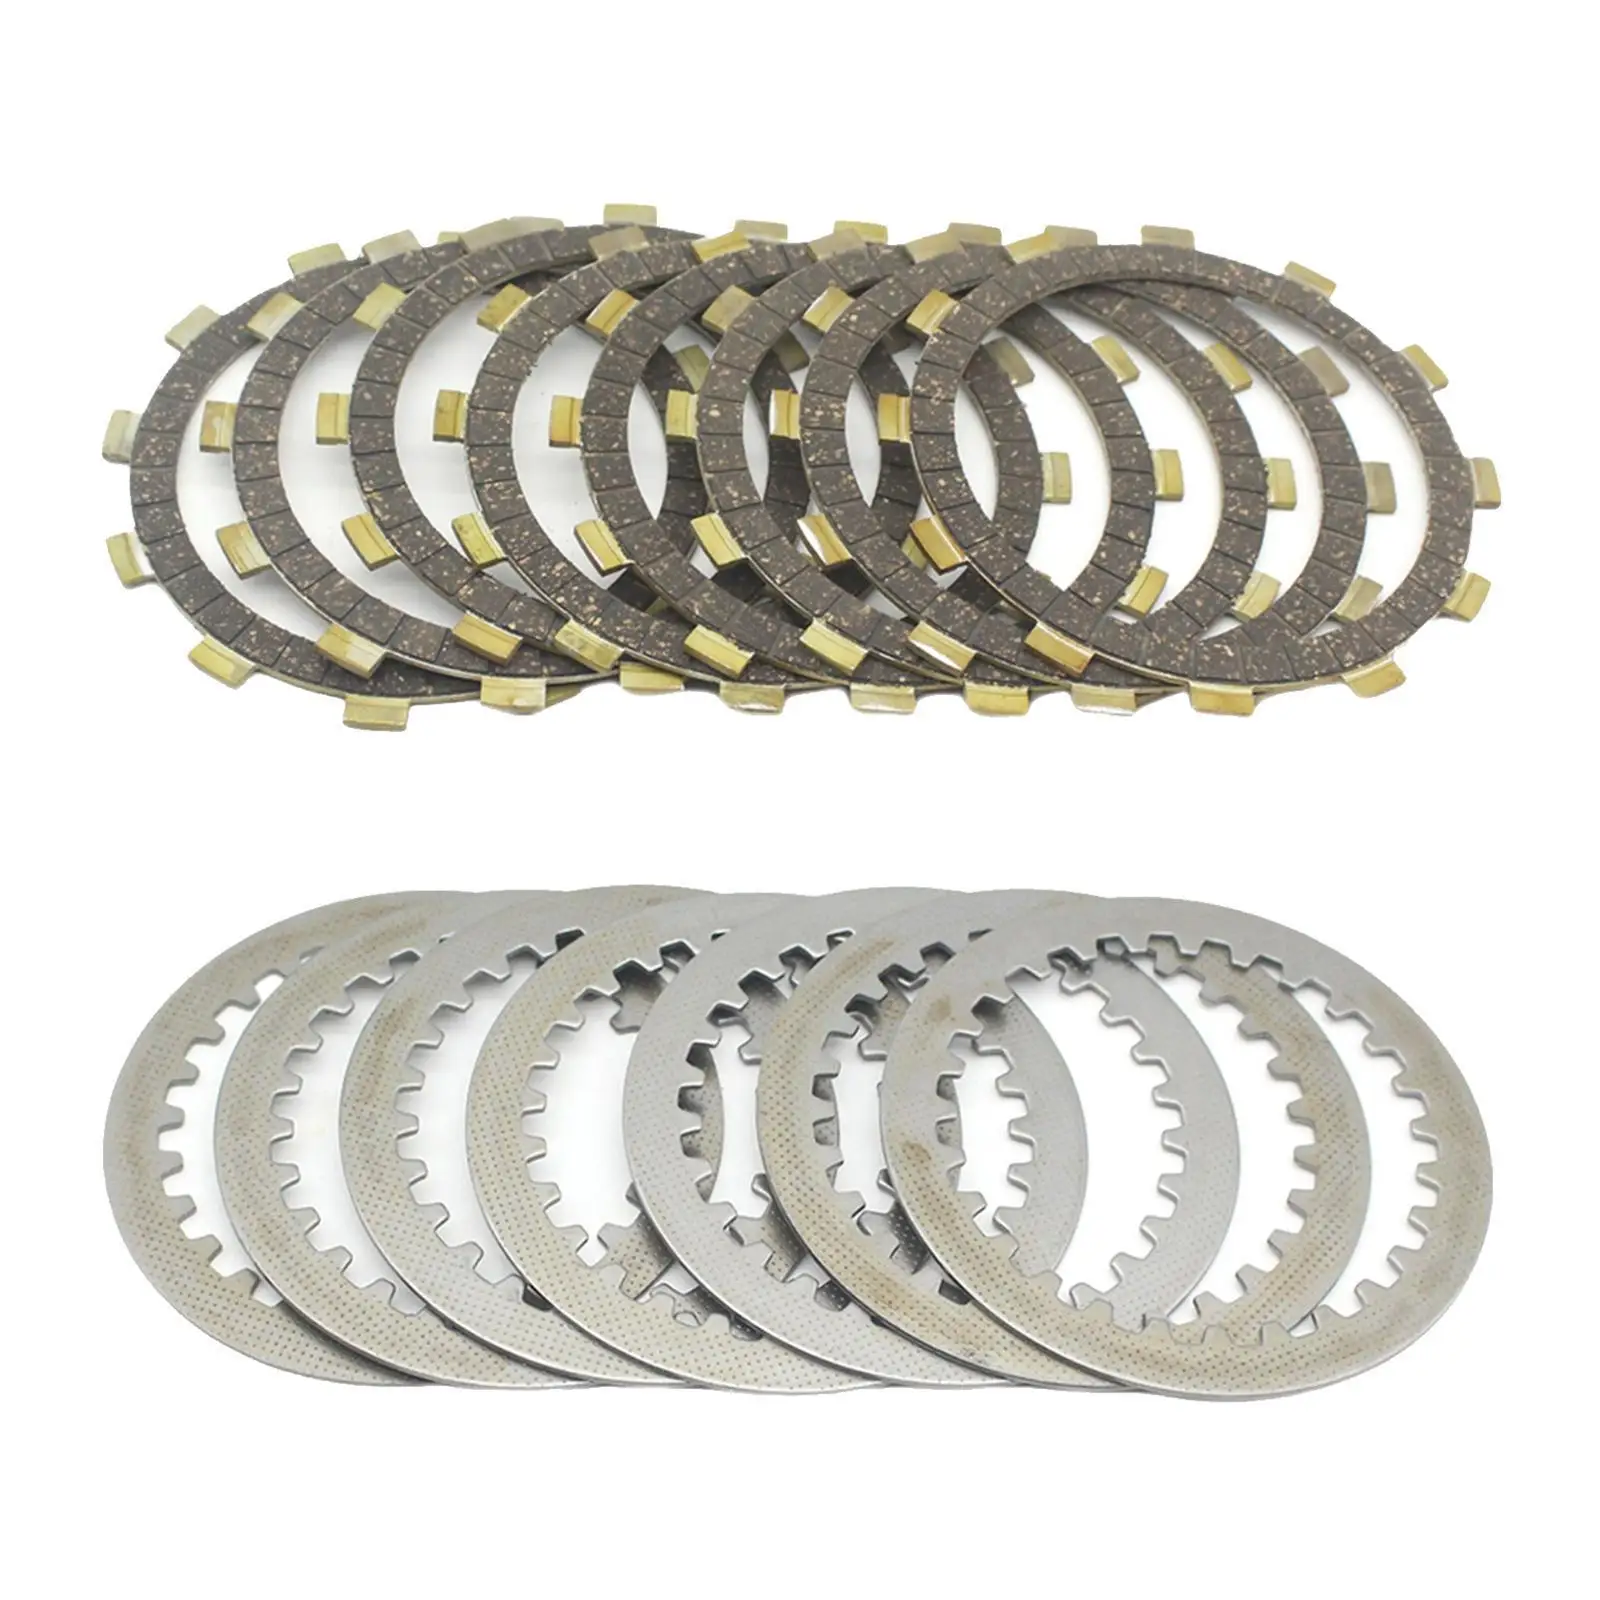 Clutch Friction Plates for Yamaha XJR400 4HM FJ600 XJ650 Motocross ATV Scooter Outdoor Engine Cooling 4H7-16321-01 168-16325-00